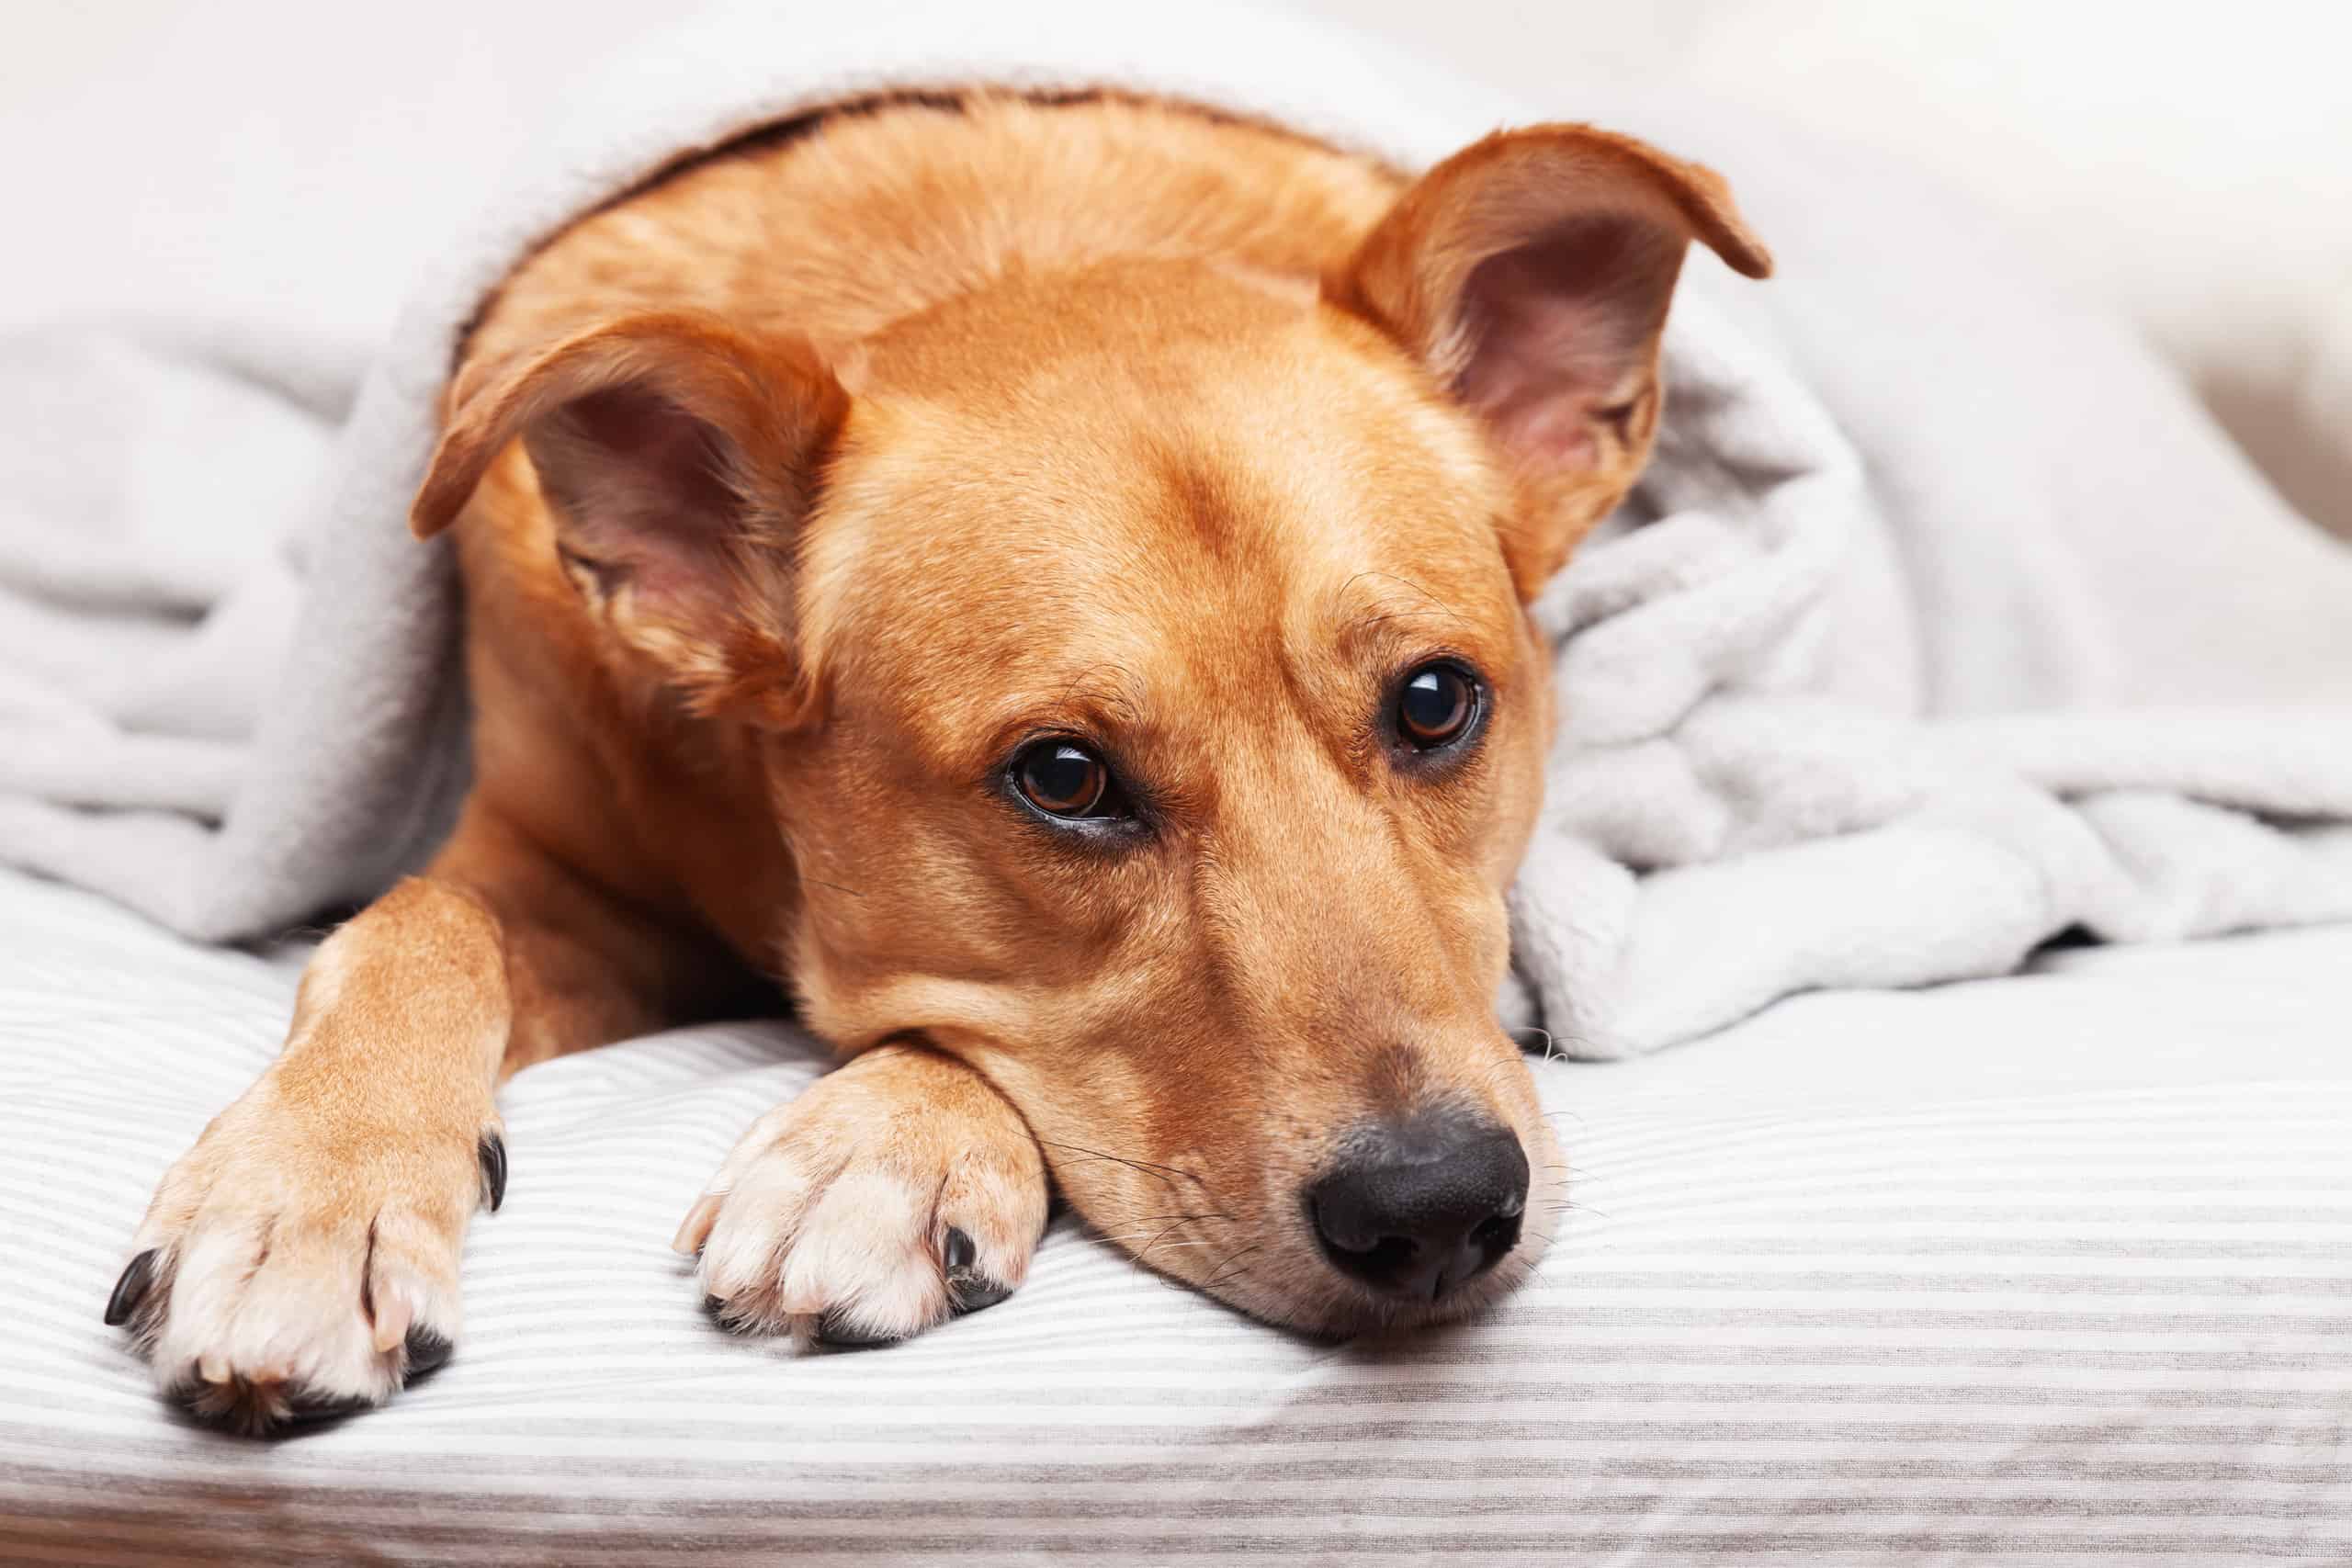 what essential oils can kill dogs